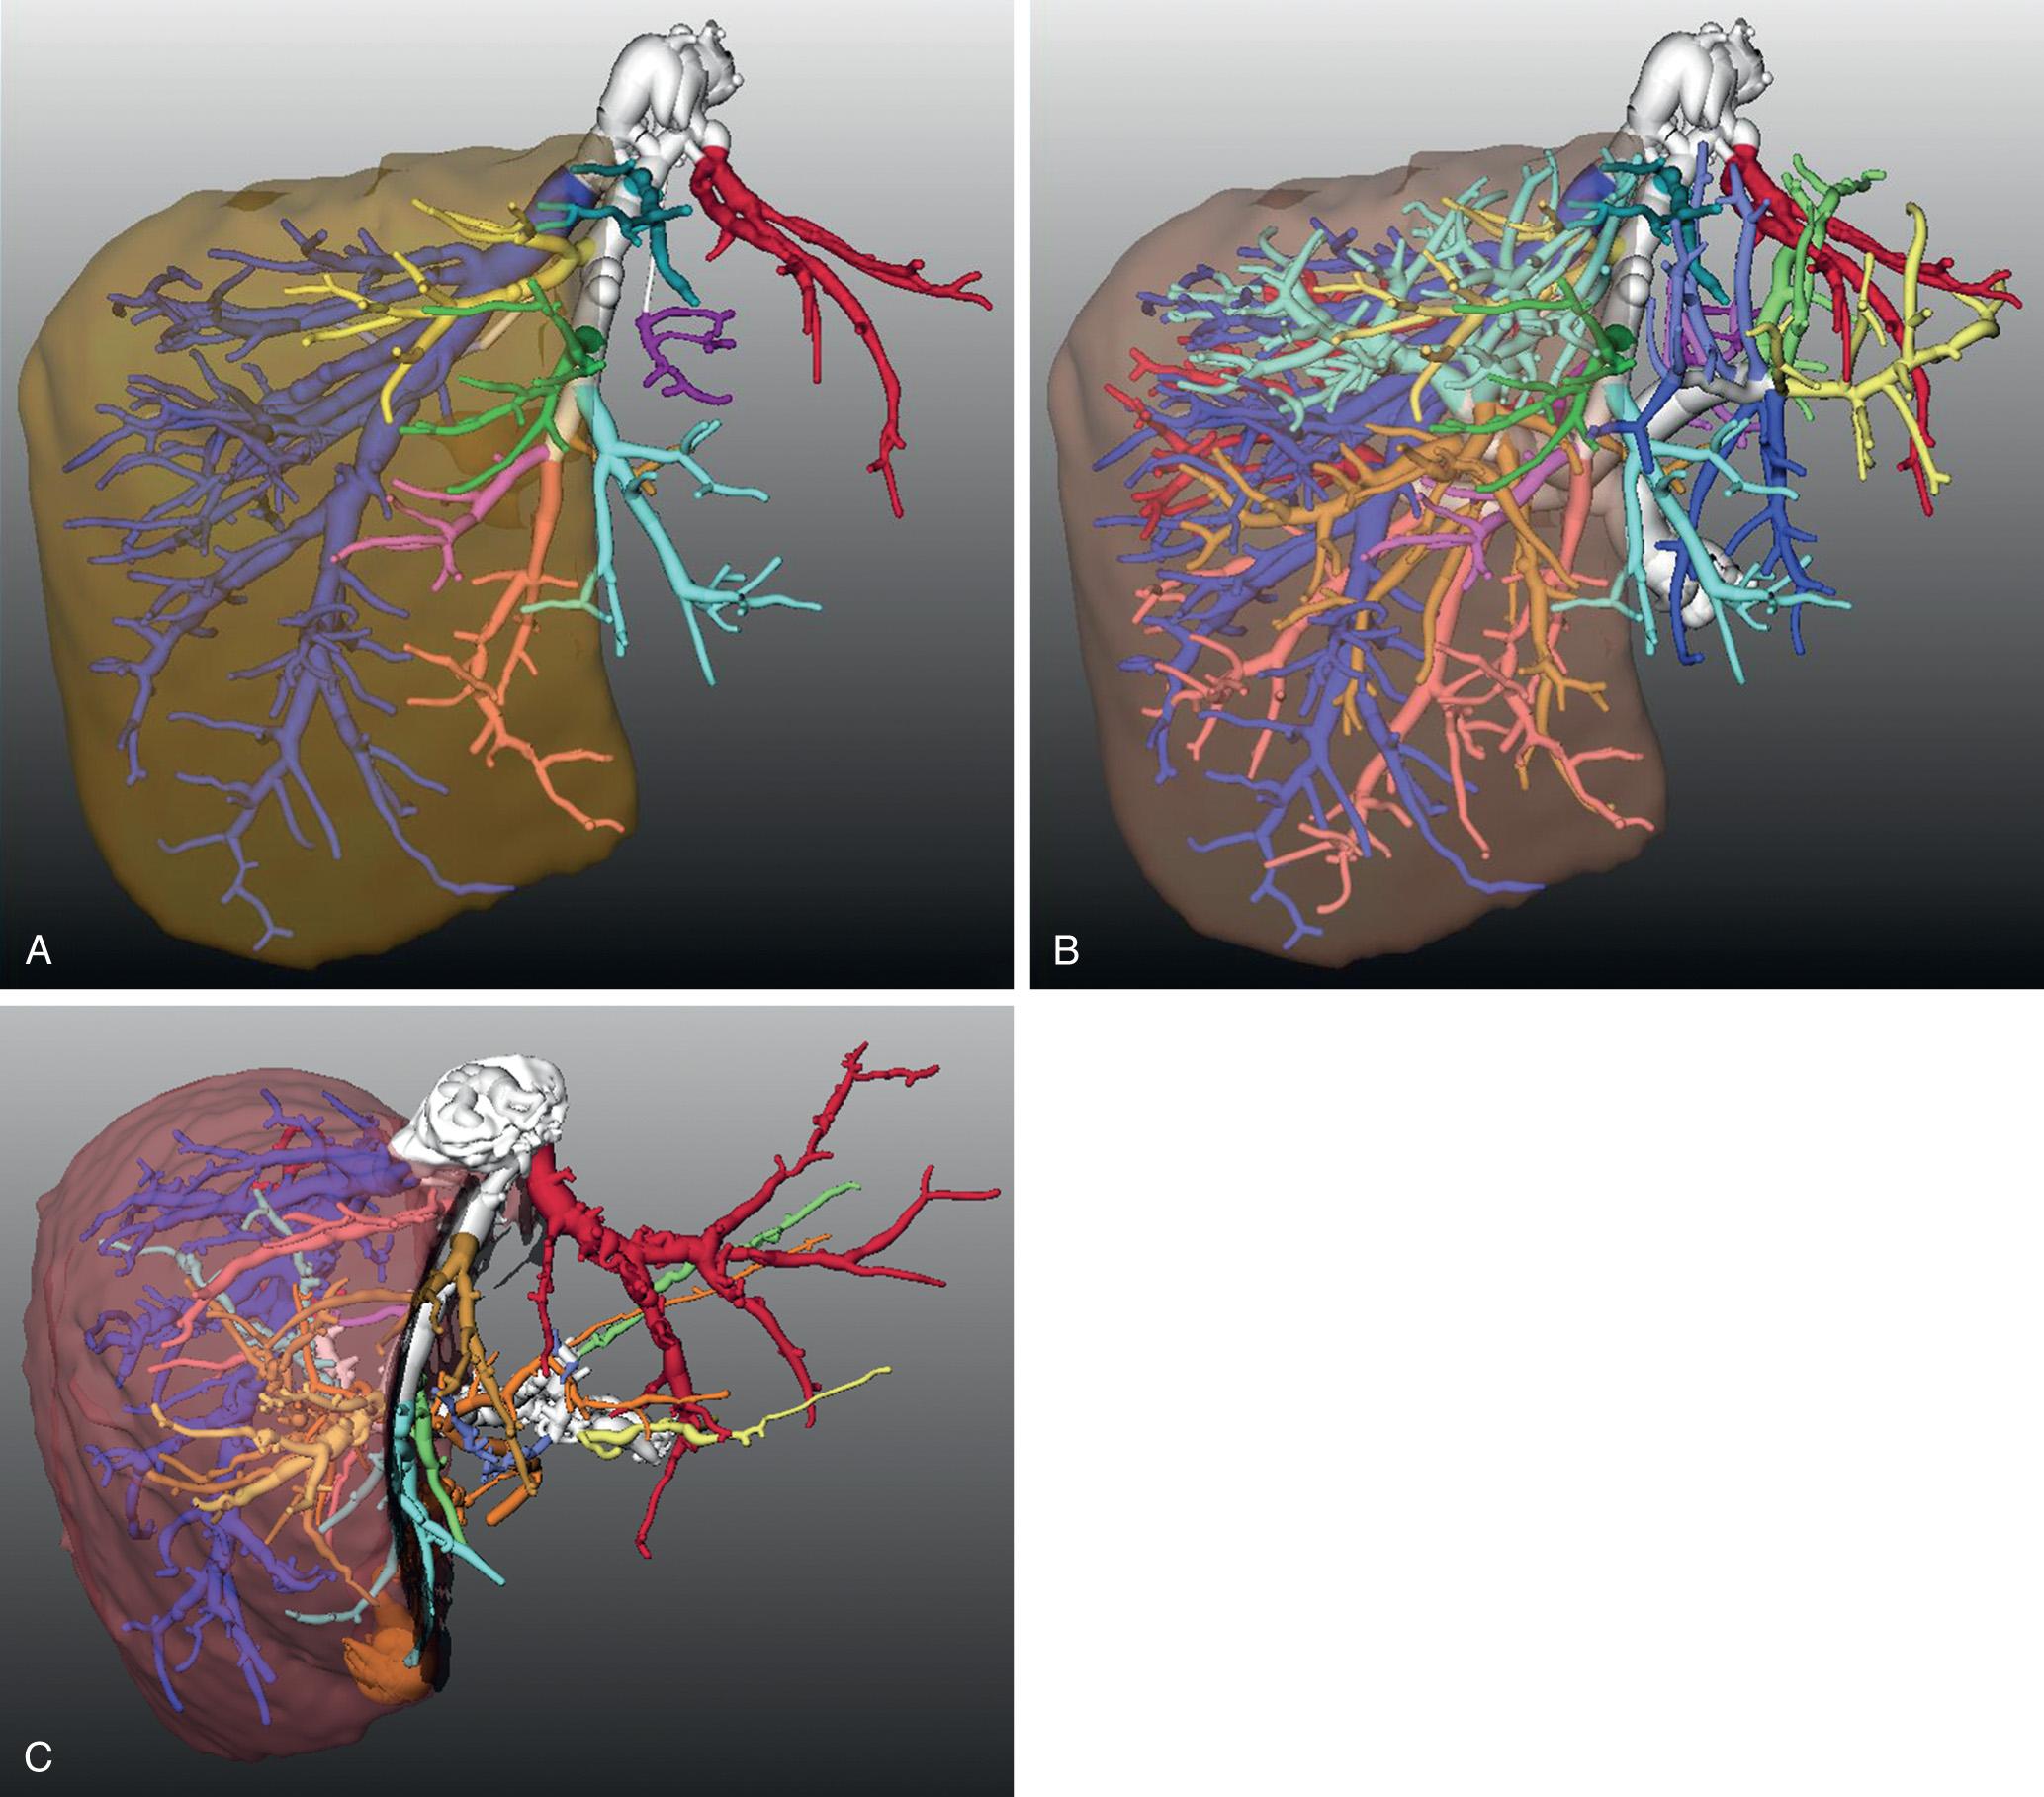 FIGURE 118.6, Virtual three-dimensional reconstruction of the liver anatomy by means of Hepavision, MeVis-Germany software. The right lobe has been reconstructed in a virtual fashion, together with the hepatic veins (A), hepatic veins and portal veins (B), and hepatic veins and biliary system (C).